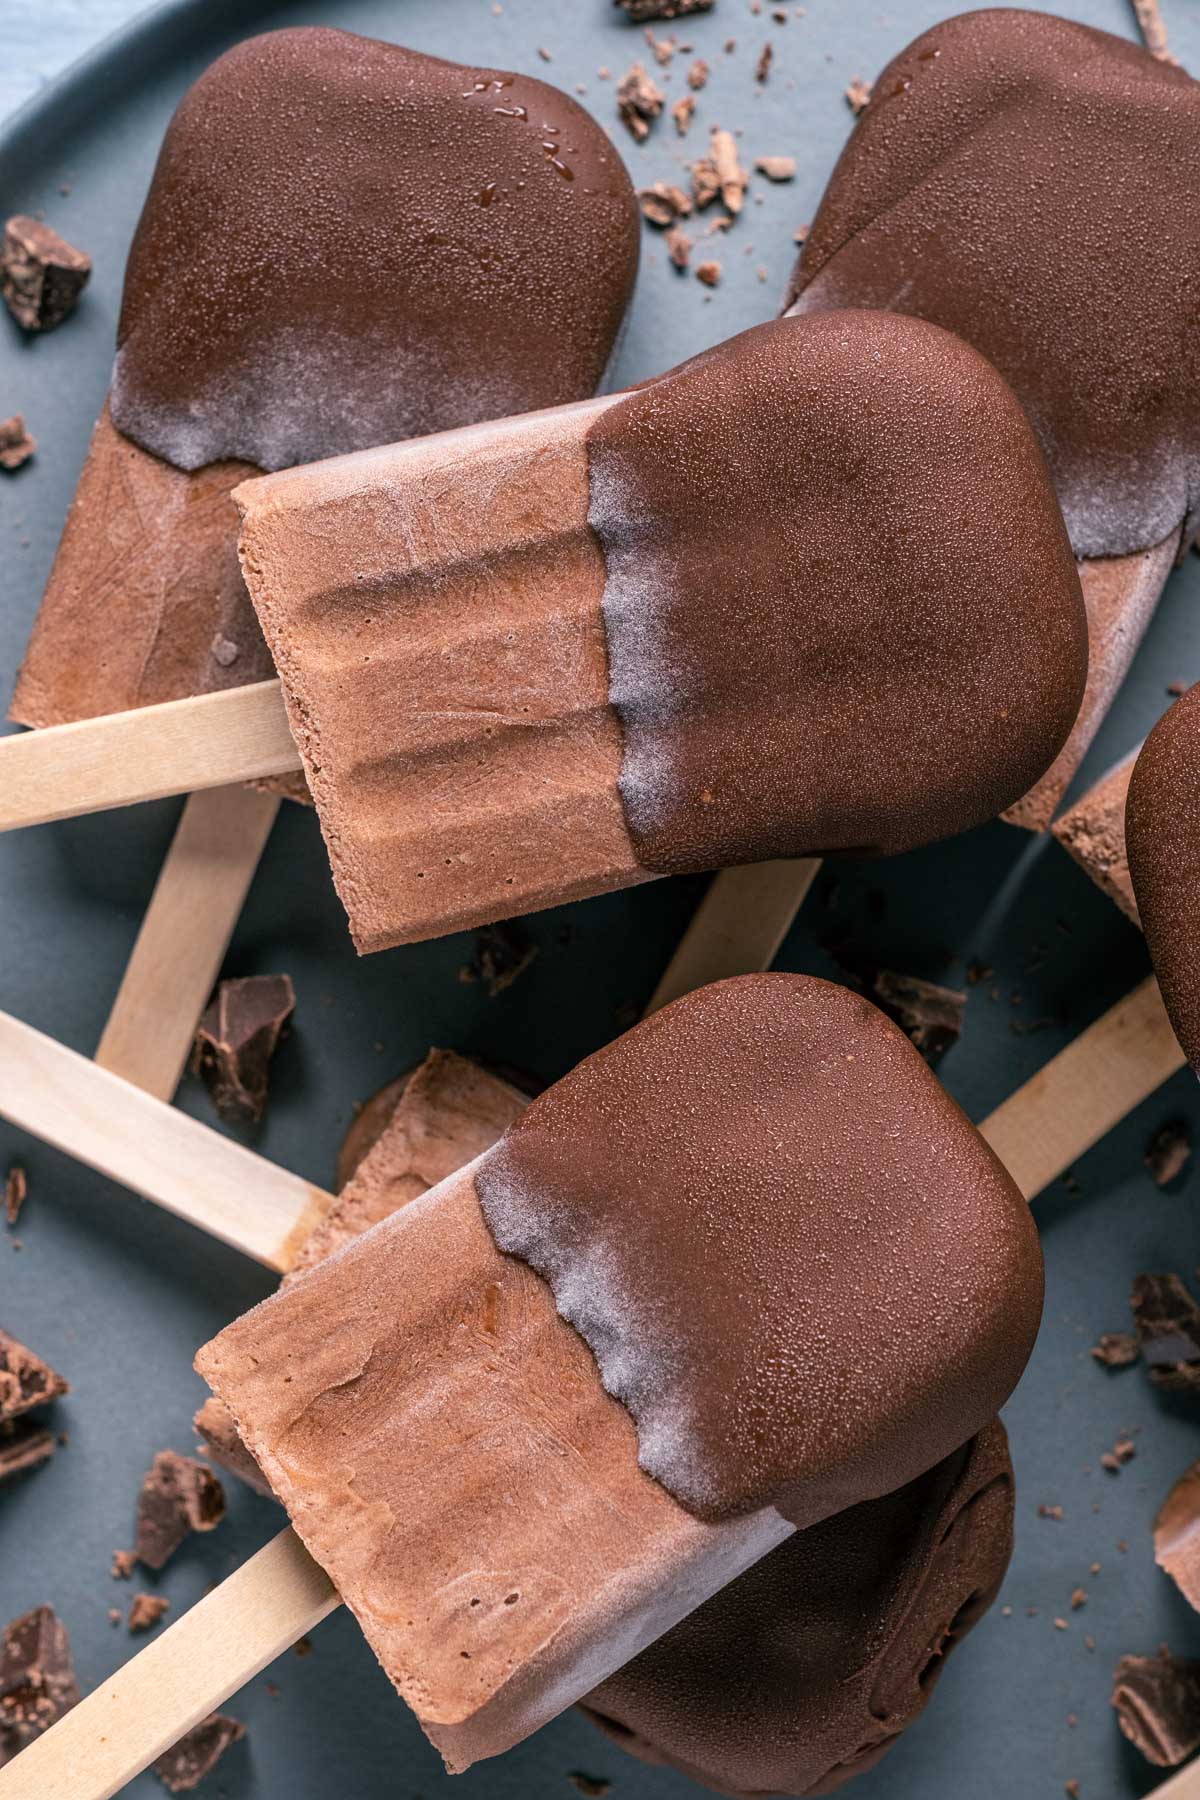 Chocolate dipped popsicles stacked up on a plate.